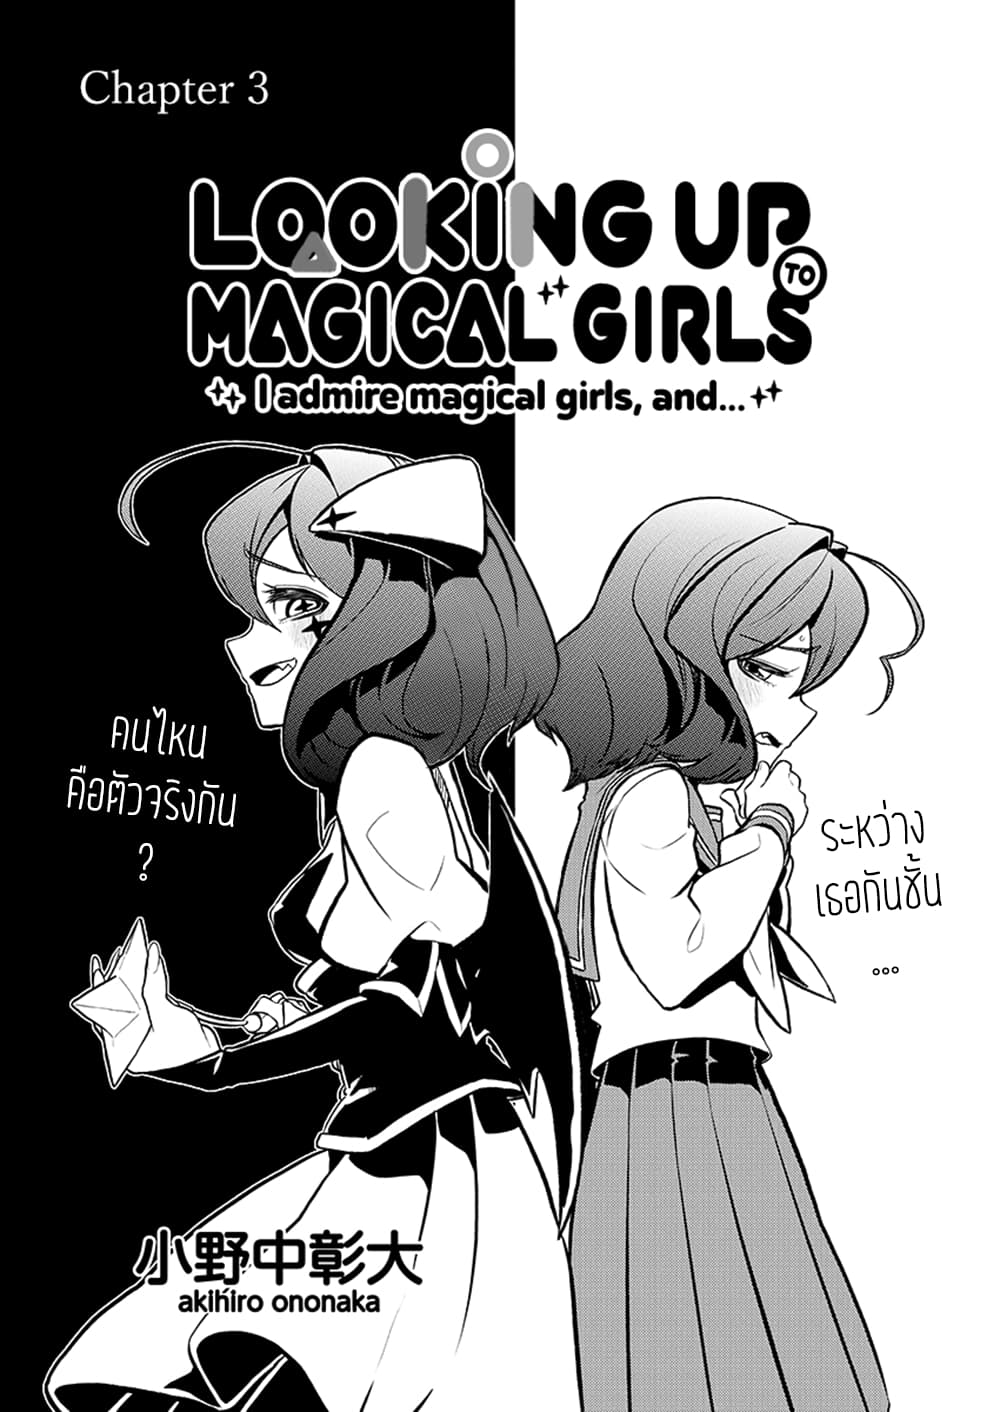 Looking up to Magical Girls 3 (4)